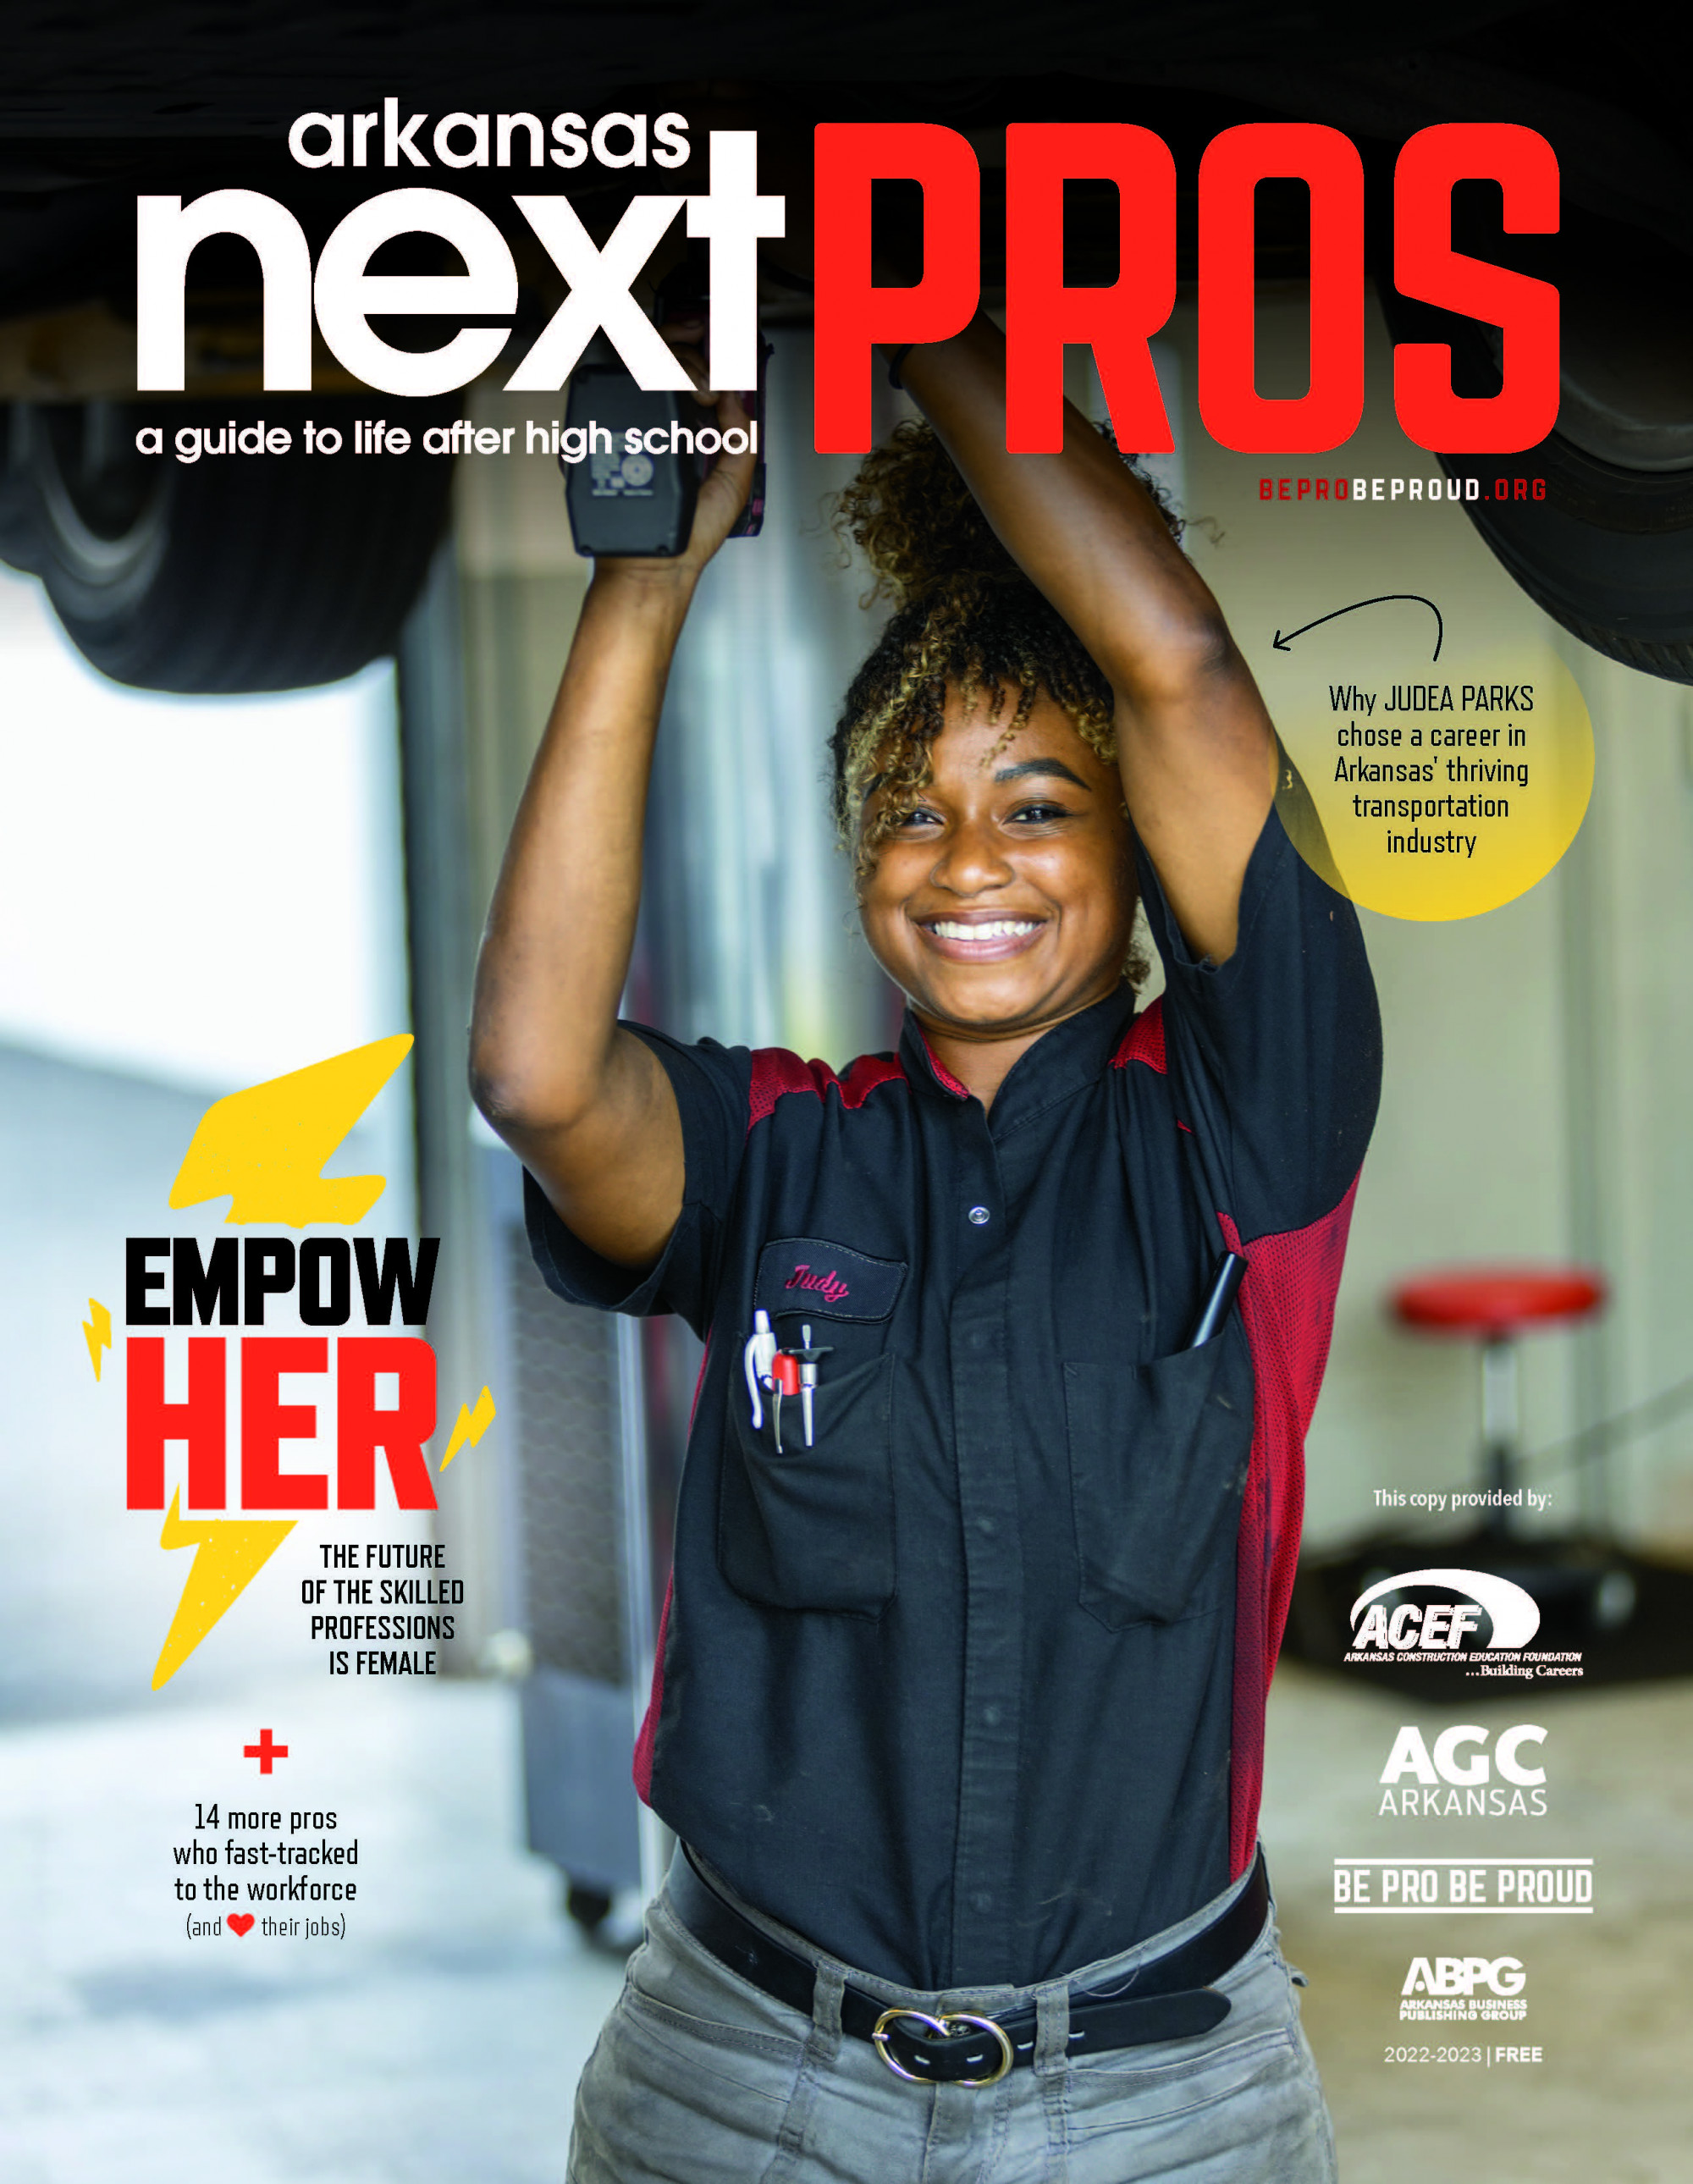 Arkansas NEXT PROS | a guide to life after high school | 2021-22 cover Tools of the Trade